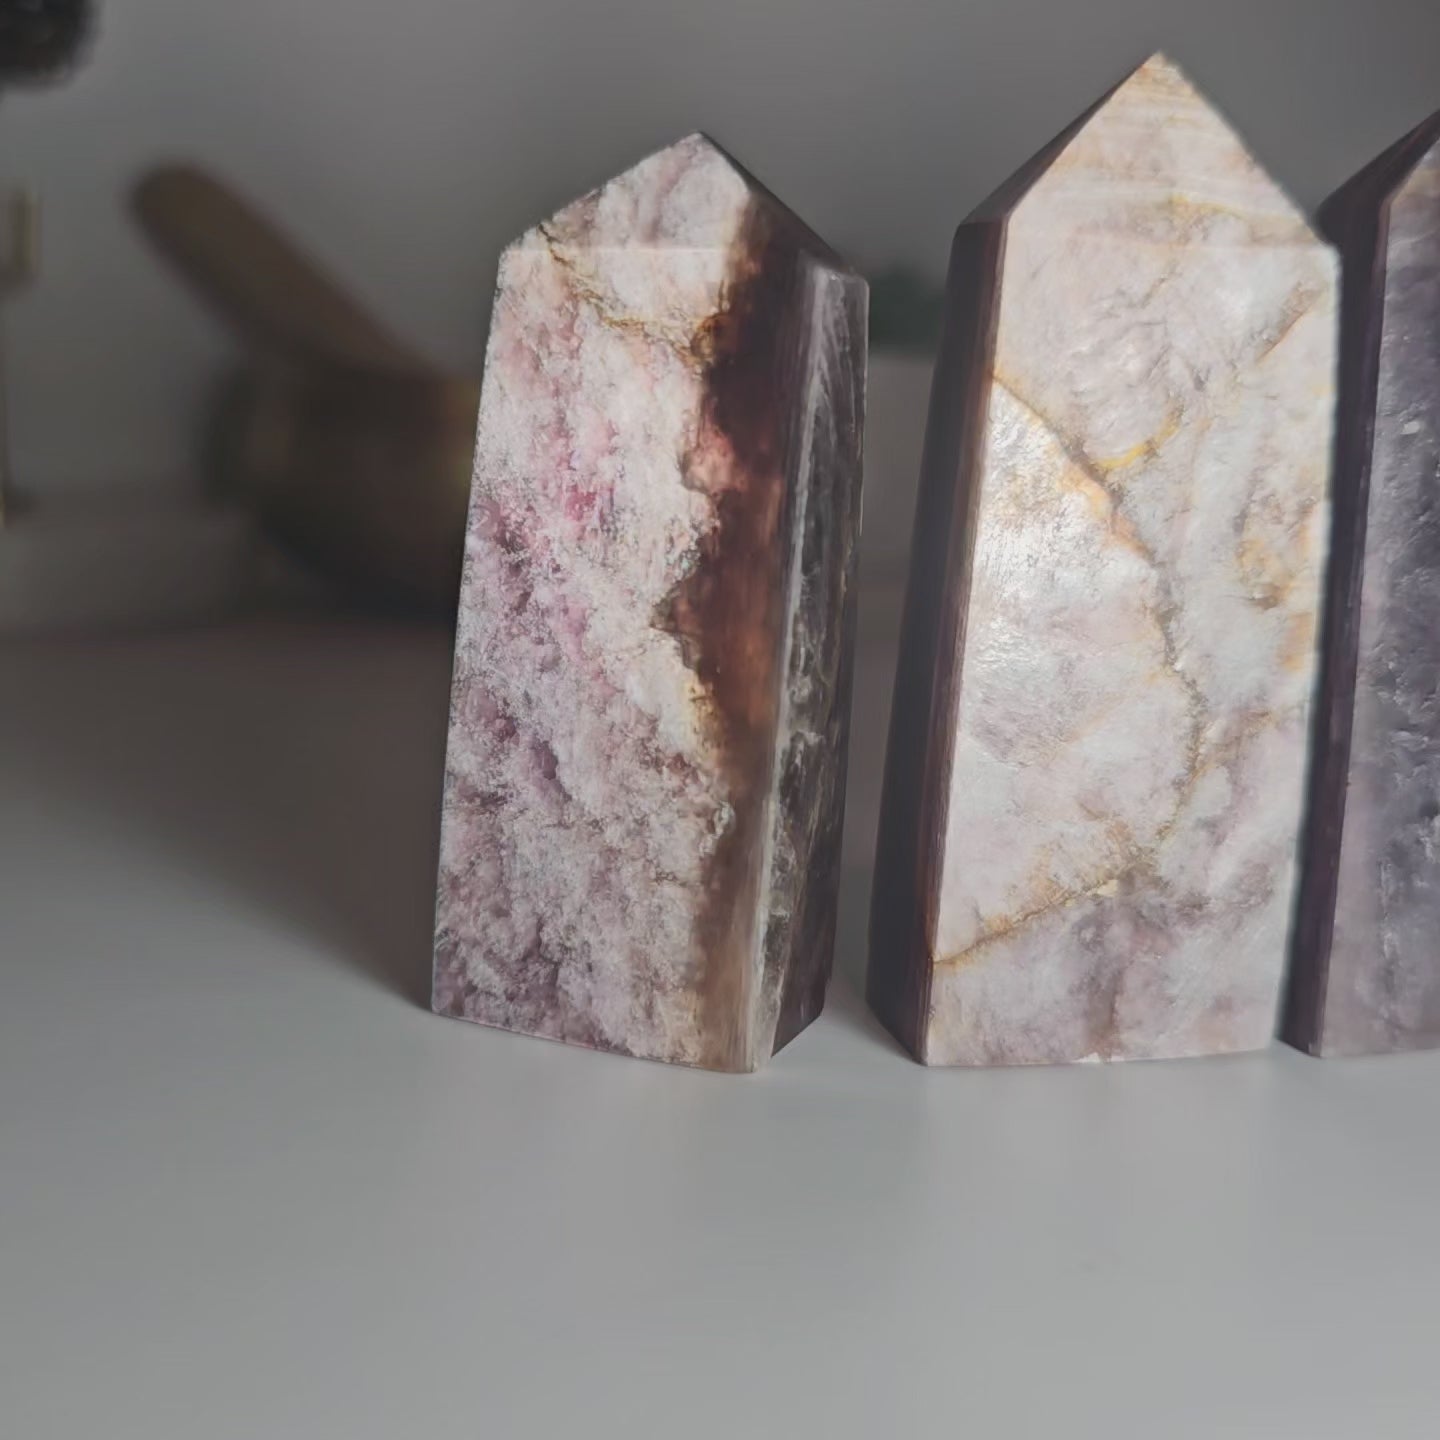 Gemmy high quality Mica Lepidolite towers